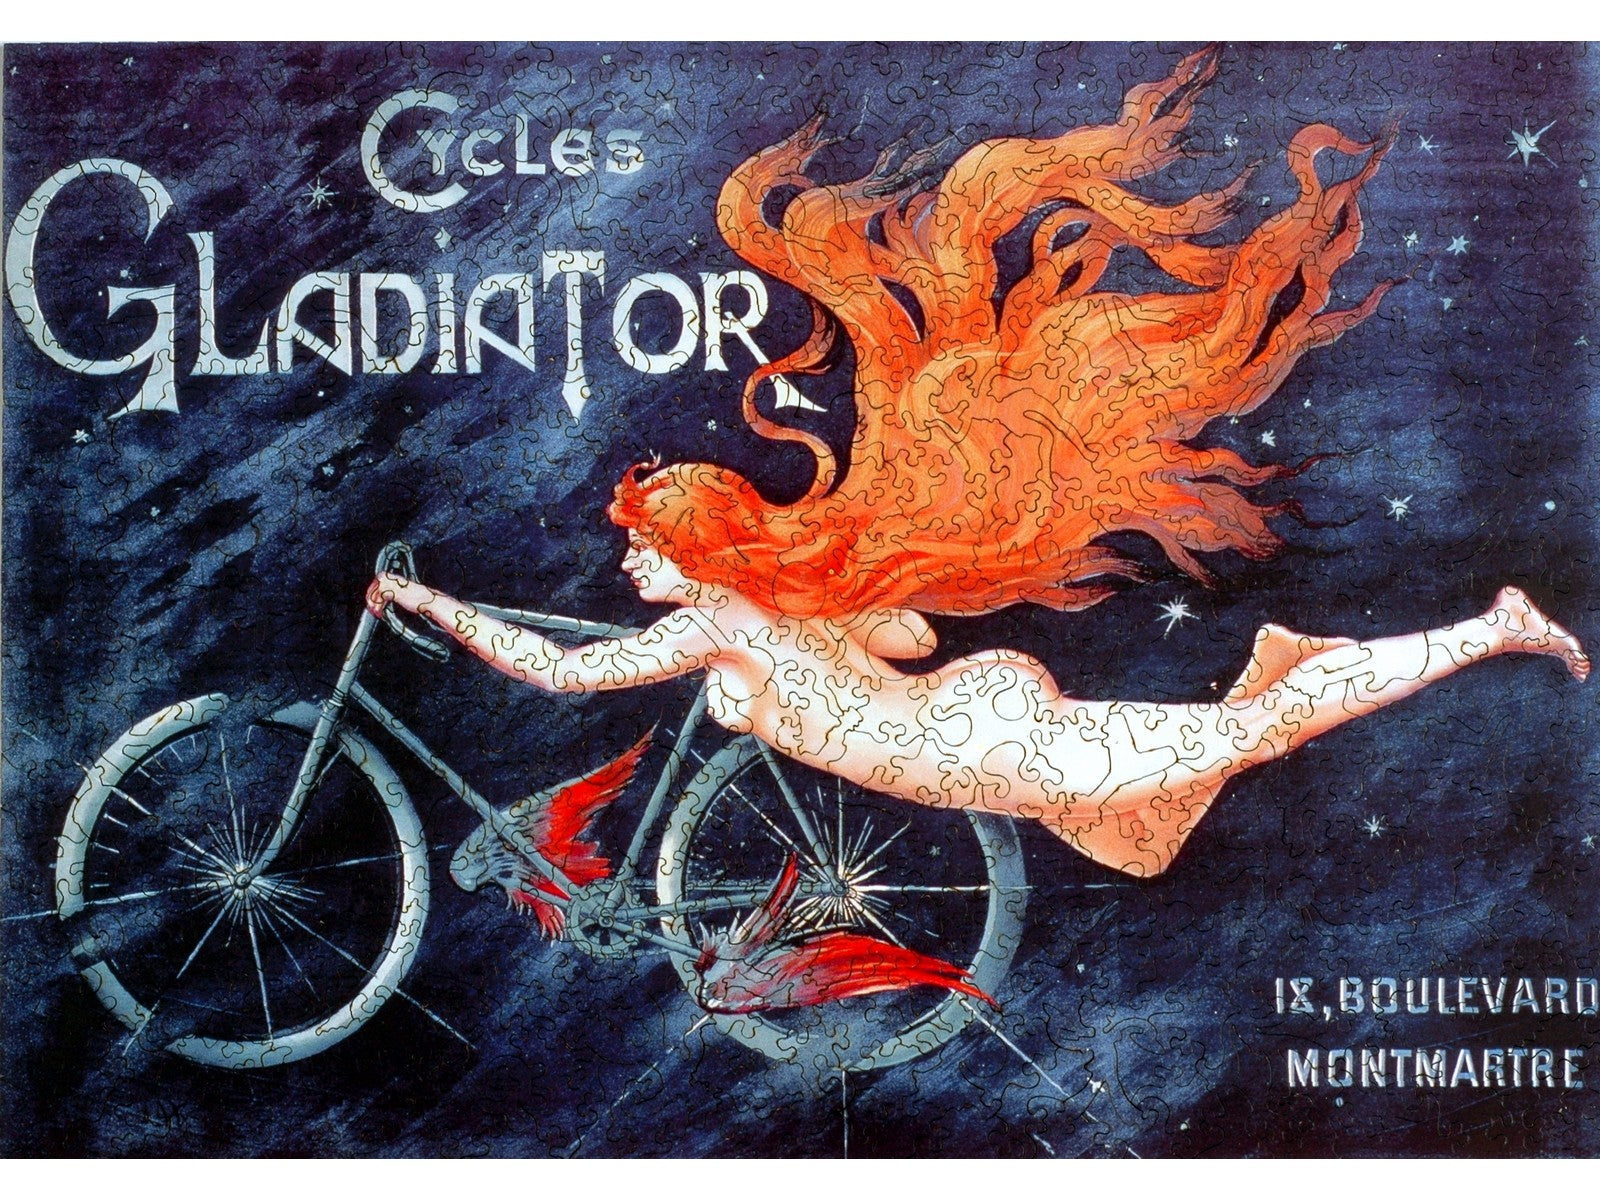 The front of the puzzle, Cycles Gladiator Large, which shows a nude woman flaying through the night sky on a bicycle.